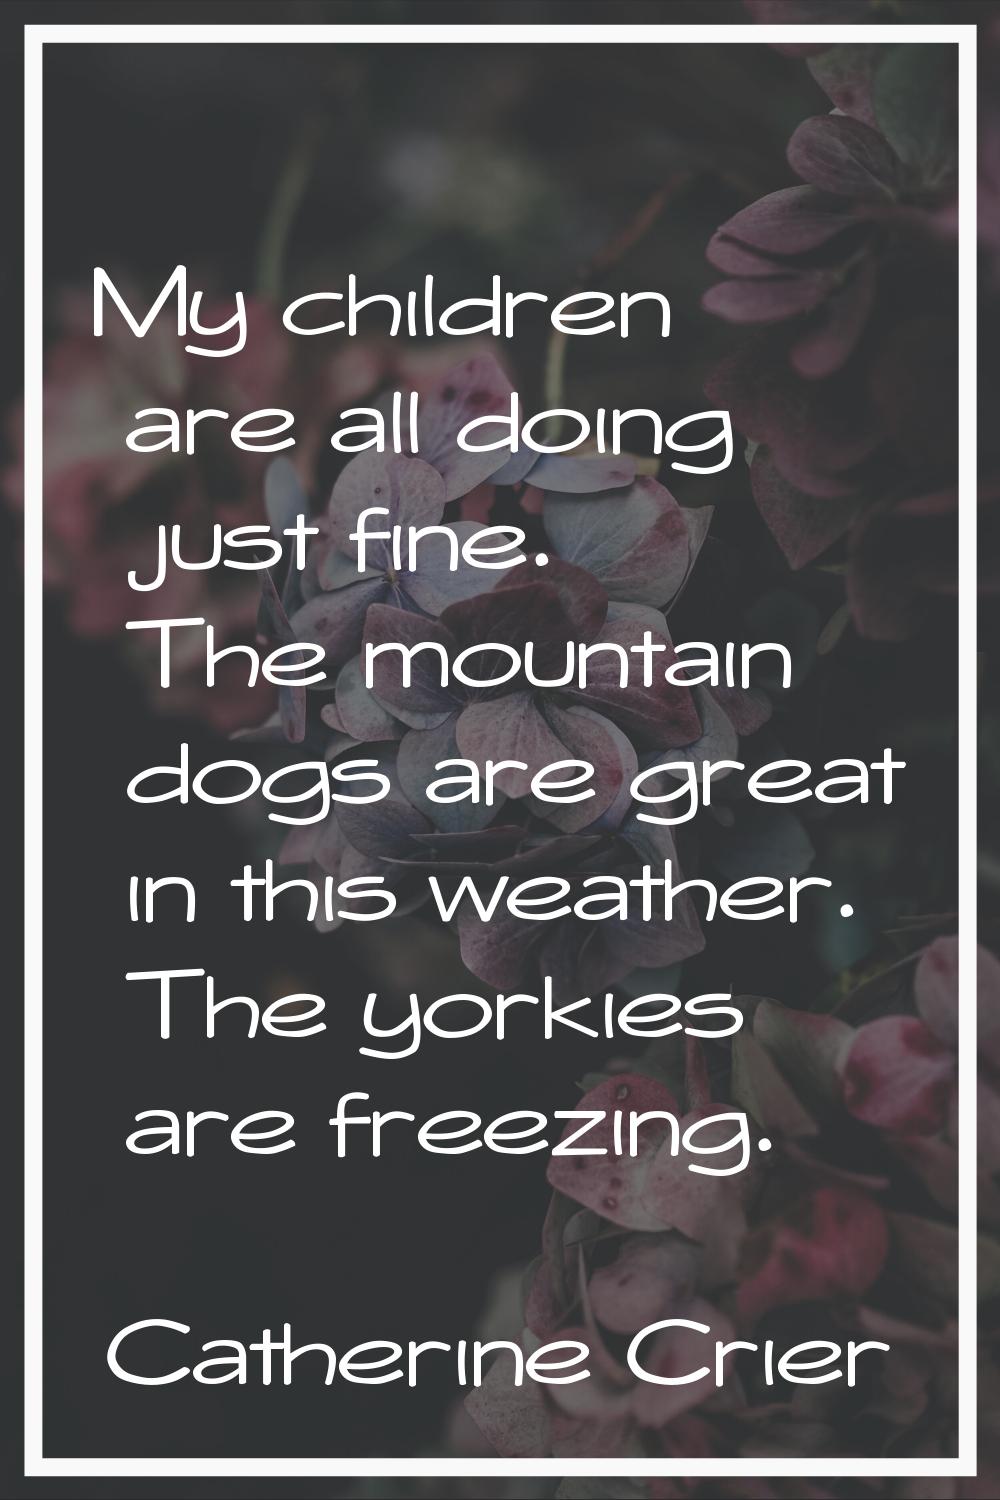 My children are all doing just fine. The mountain dogs are great in this weather. The yorkies are f